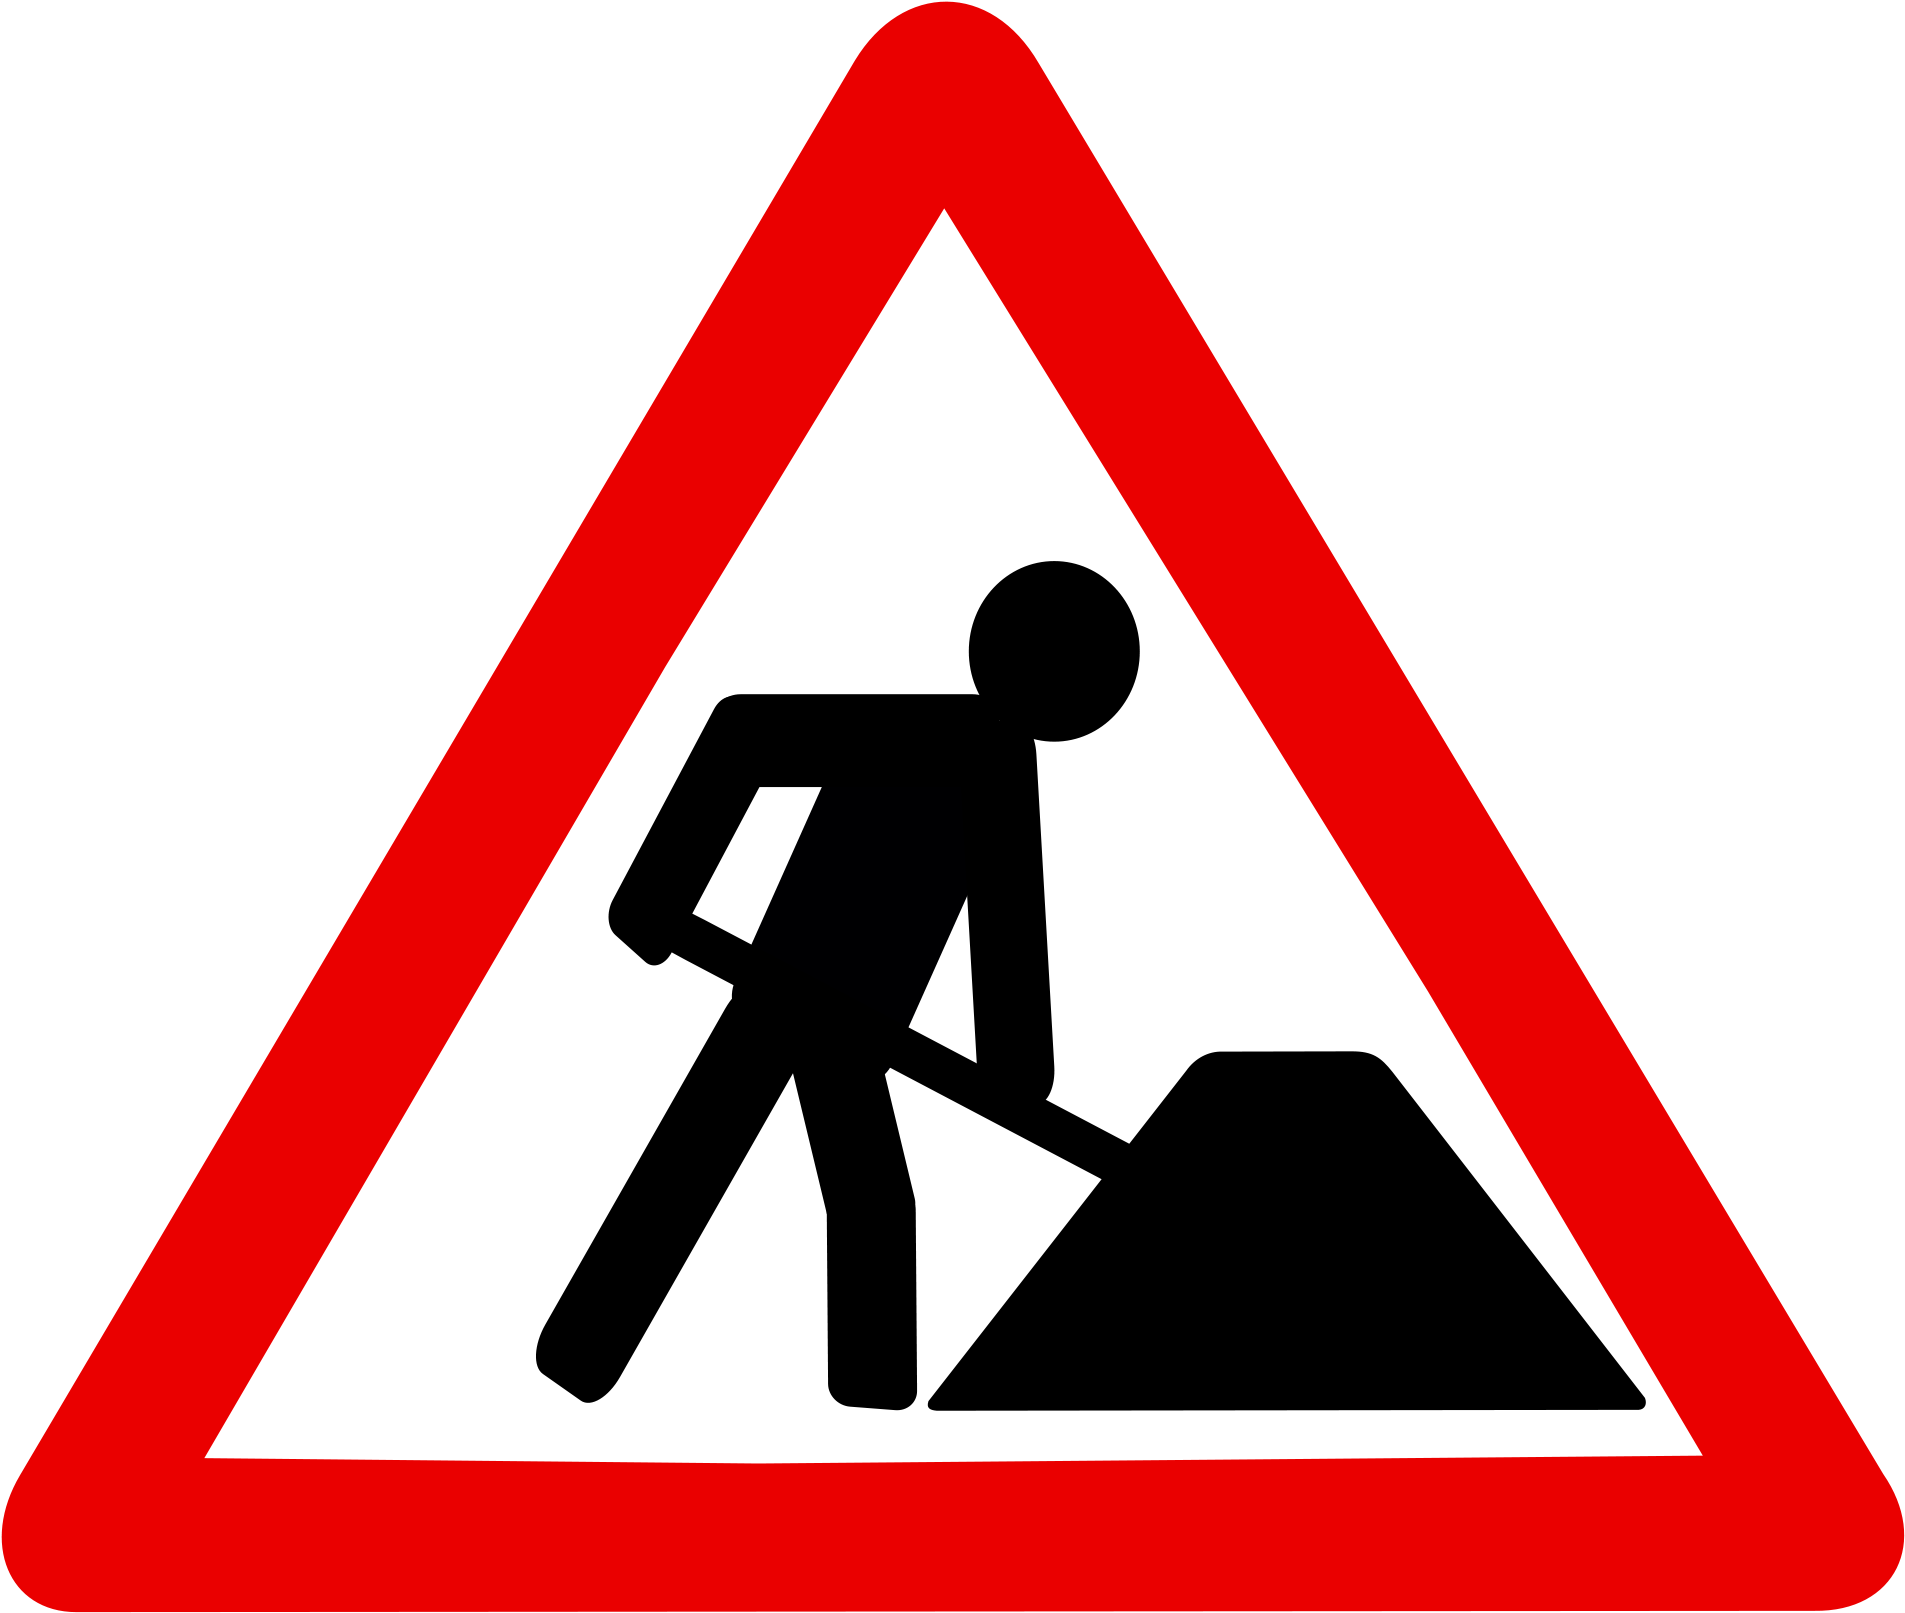 Red Construction Traffic Signs Road Works